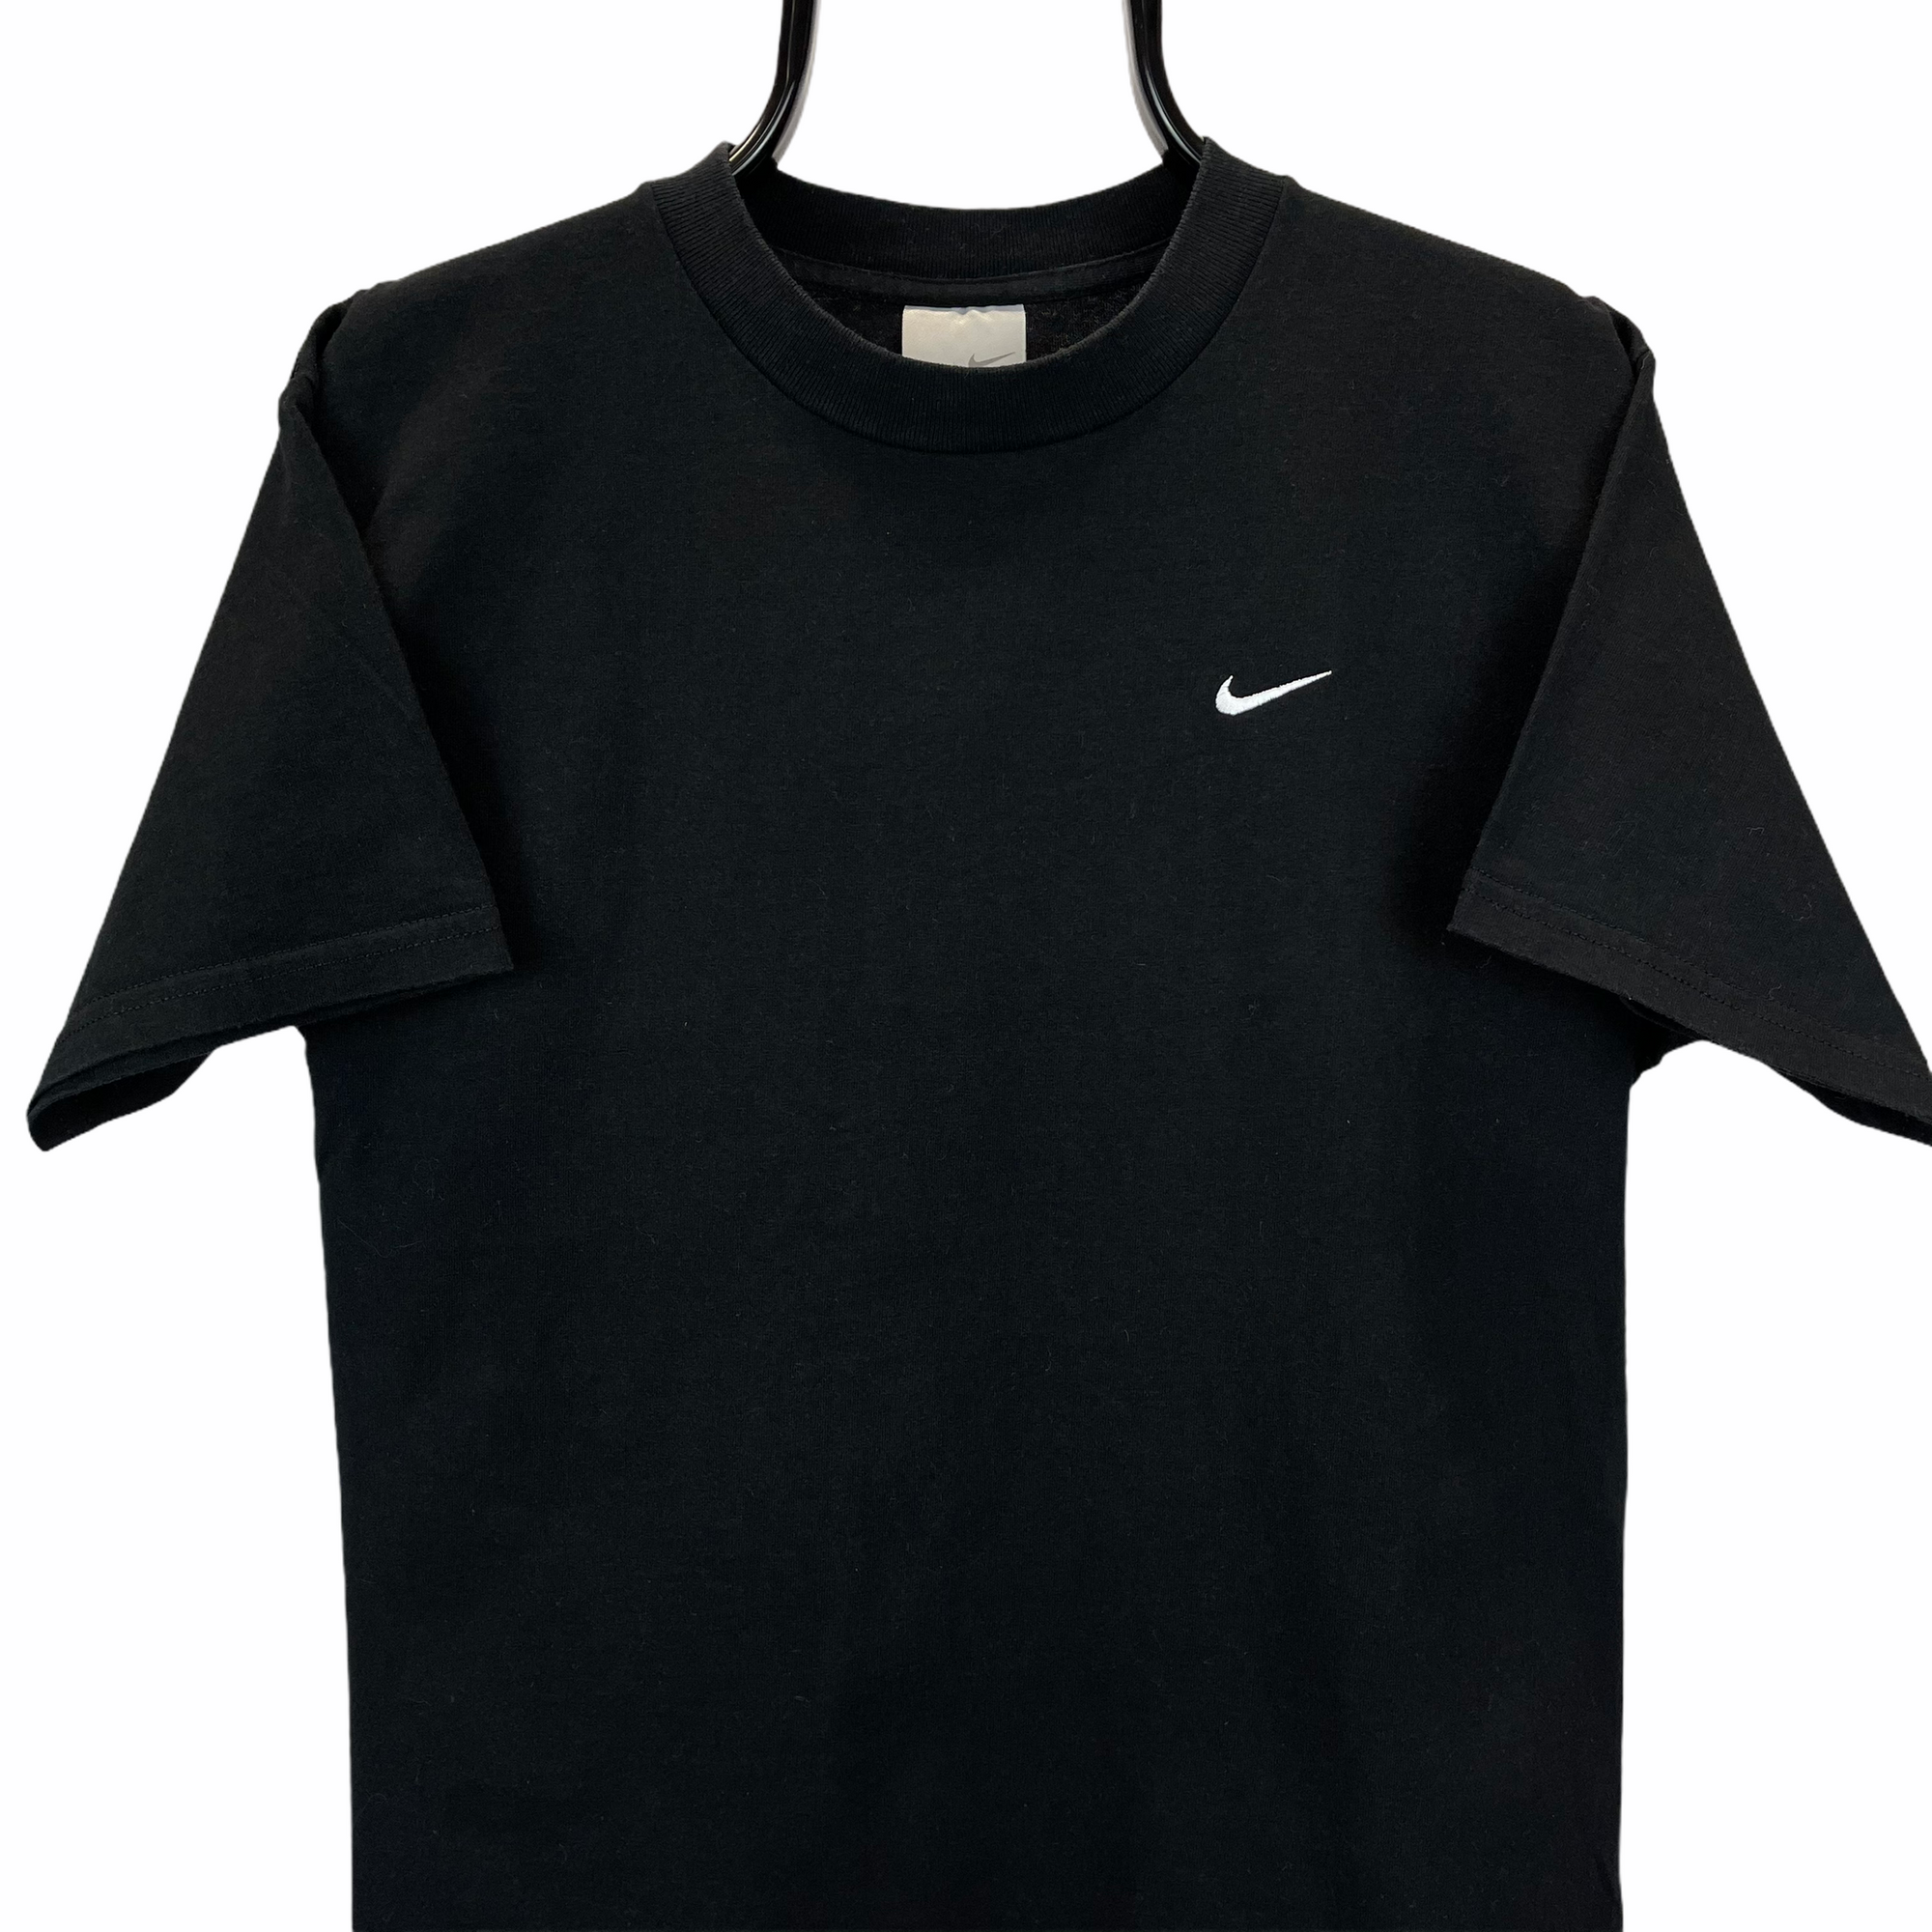 VINTAGE 90S NIKE EMBROIDERED SMALL SWOOSH TEE IN BLACK - MEN'S MEDIUM/WOMEN'S LARGE